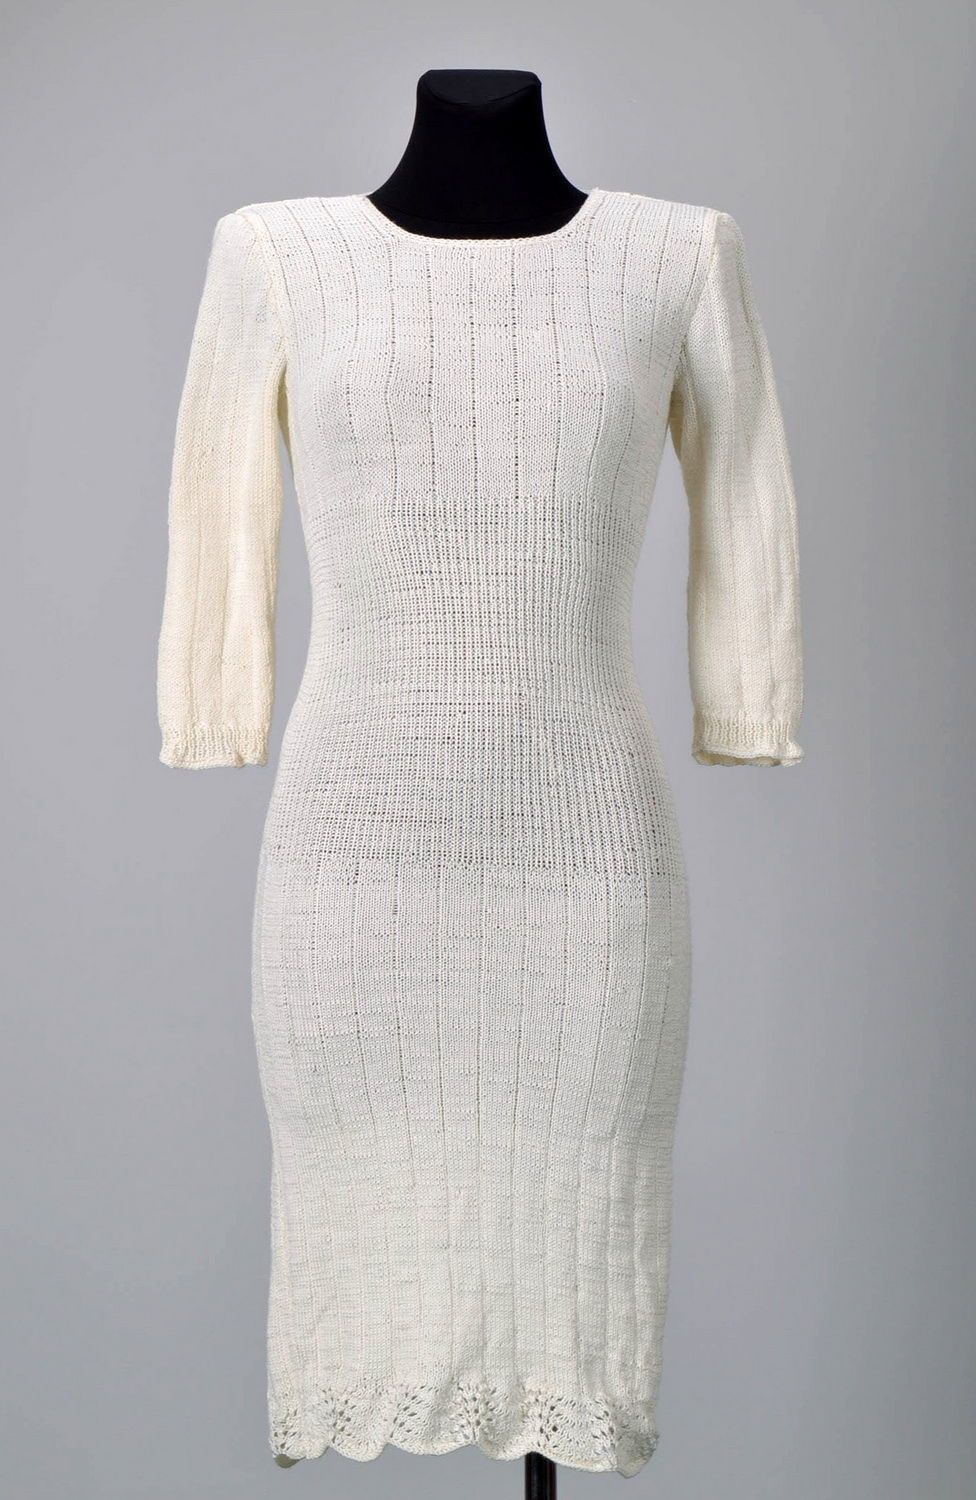 White knitted dress photo 3